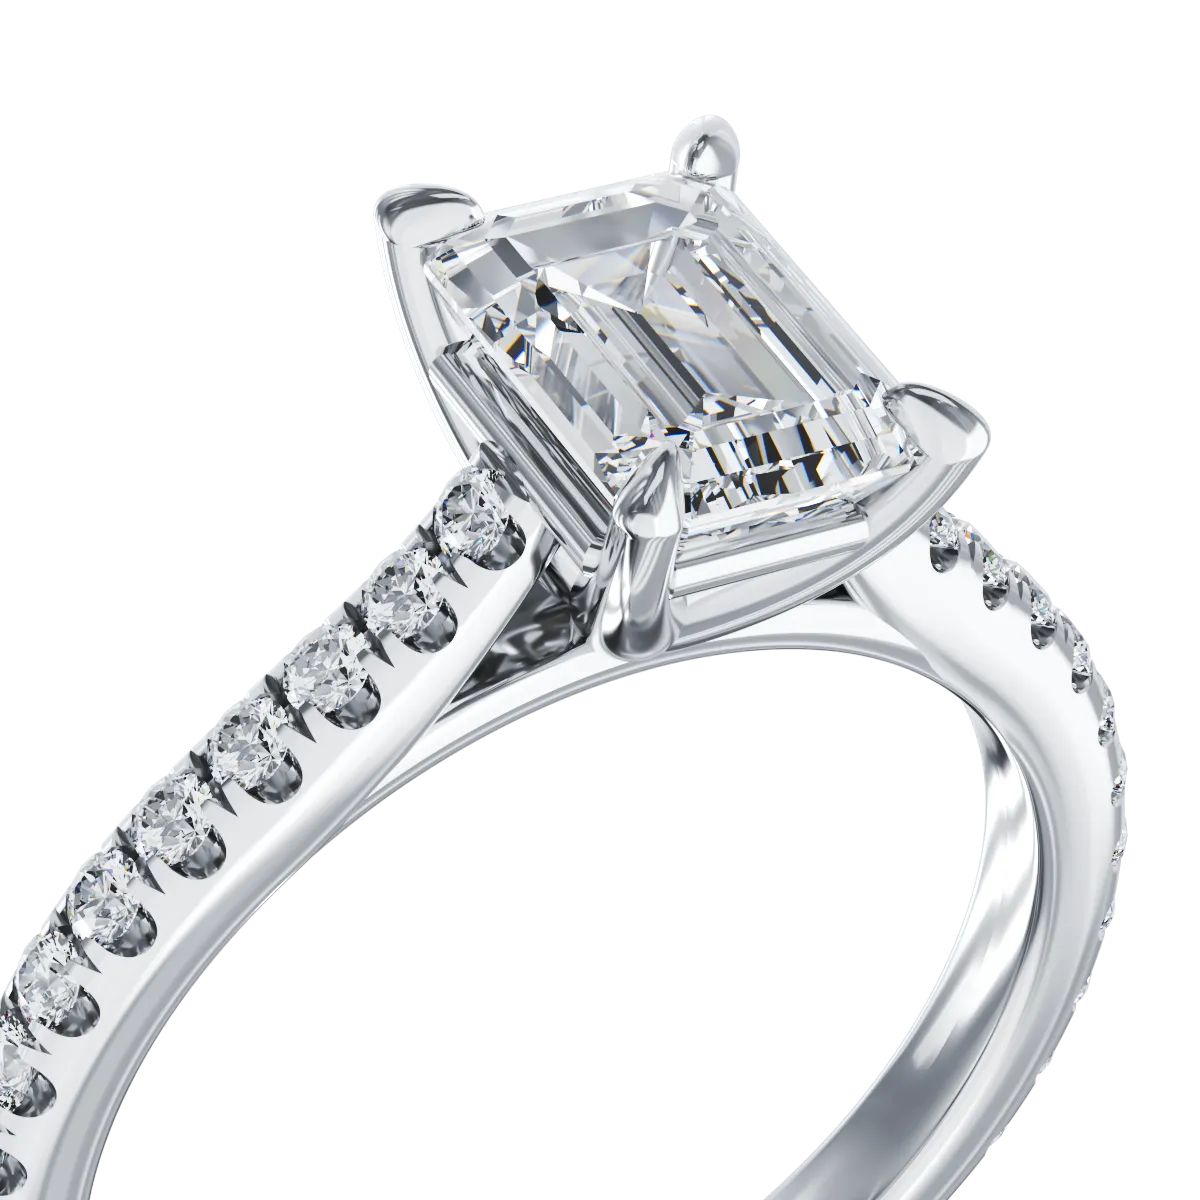 18K white gold engagement ring with 1.2ct diamond and 0.286ct diamonds